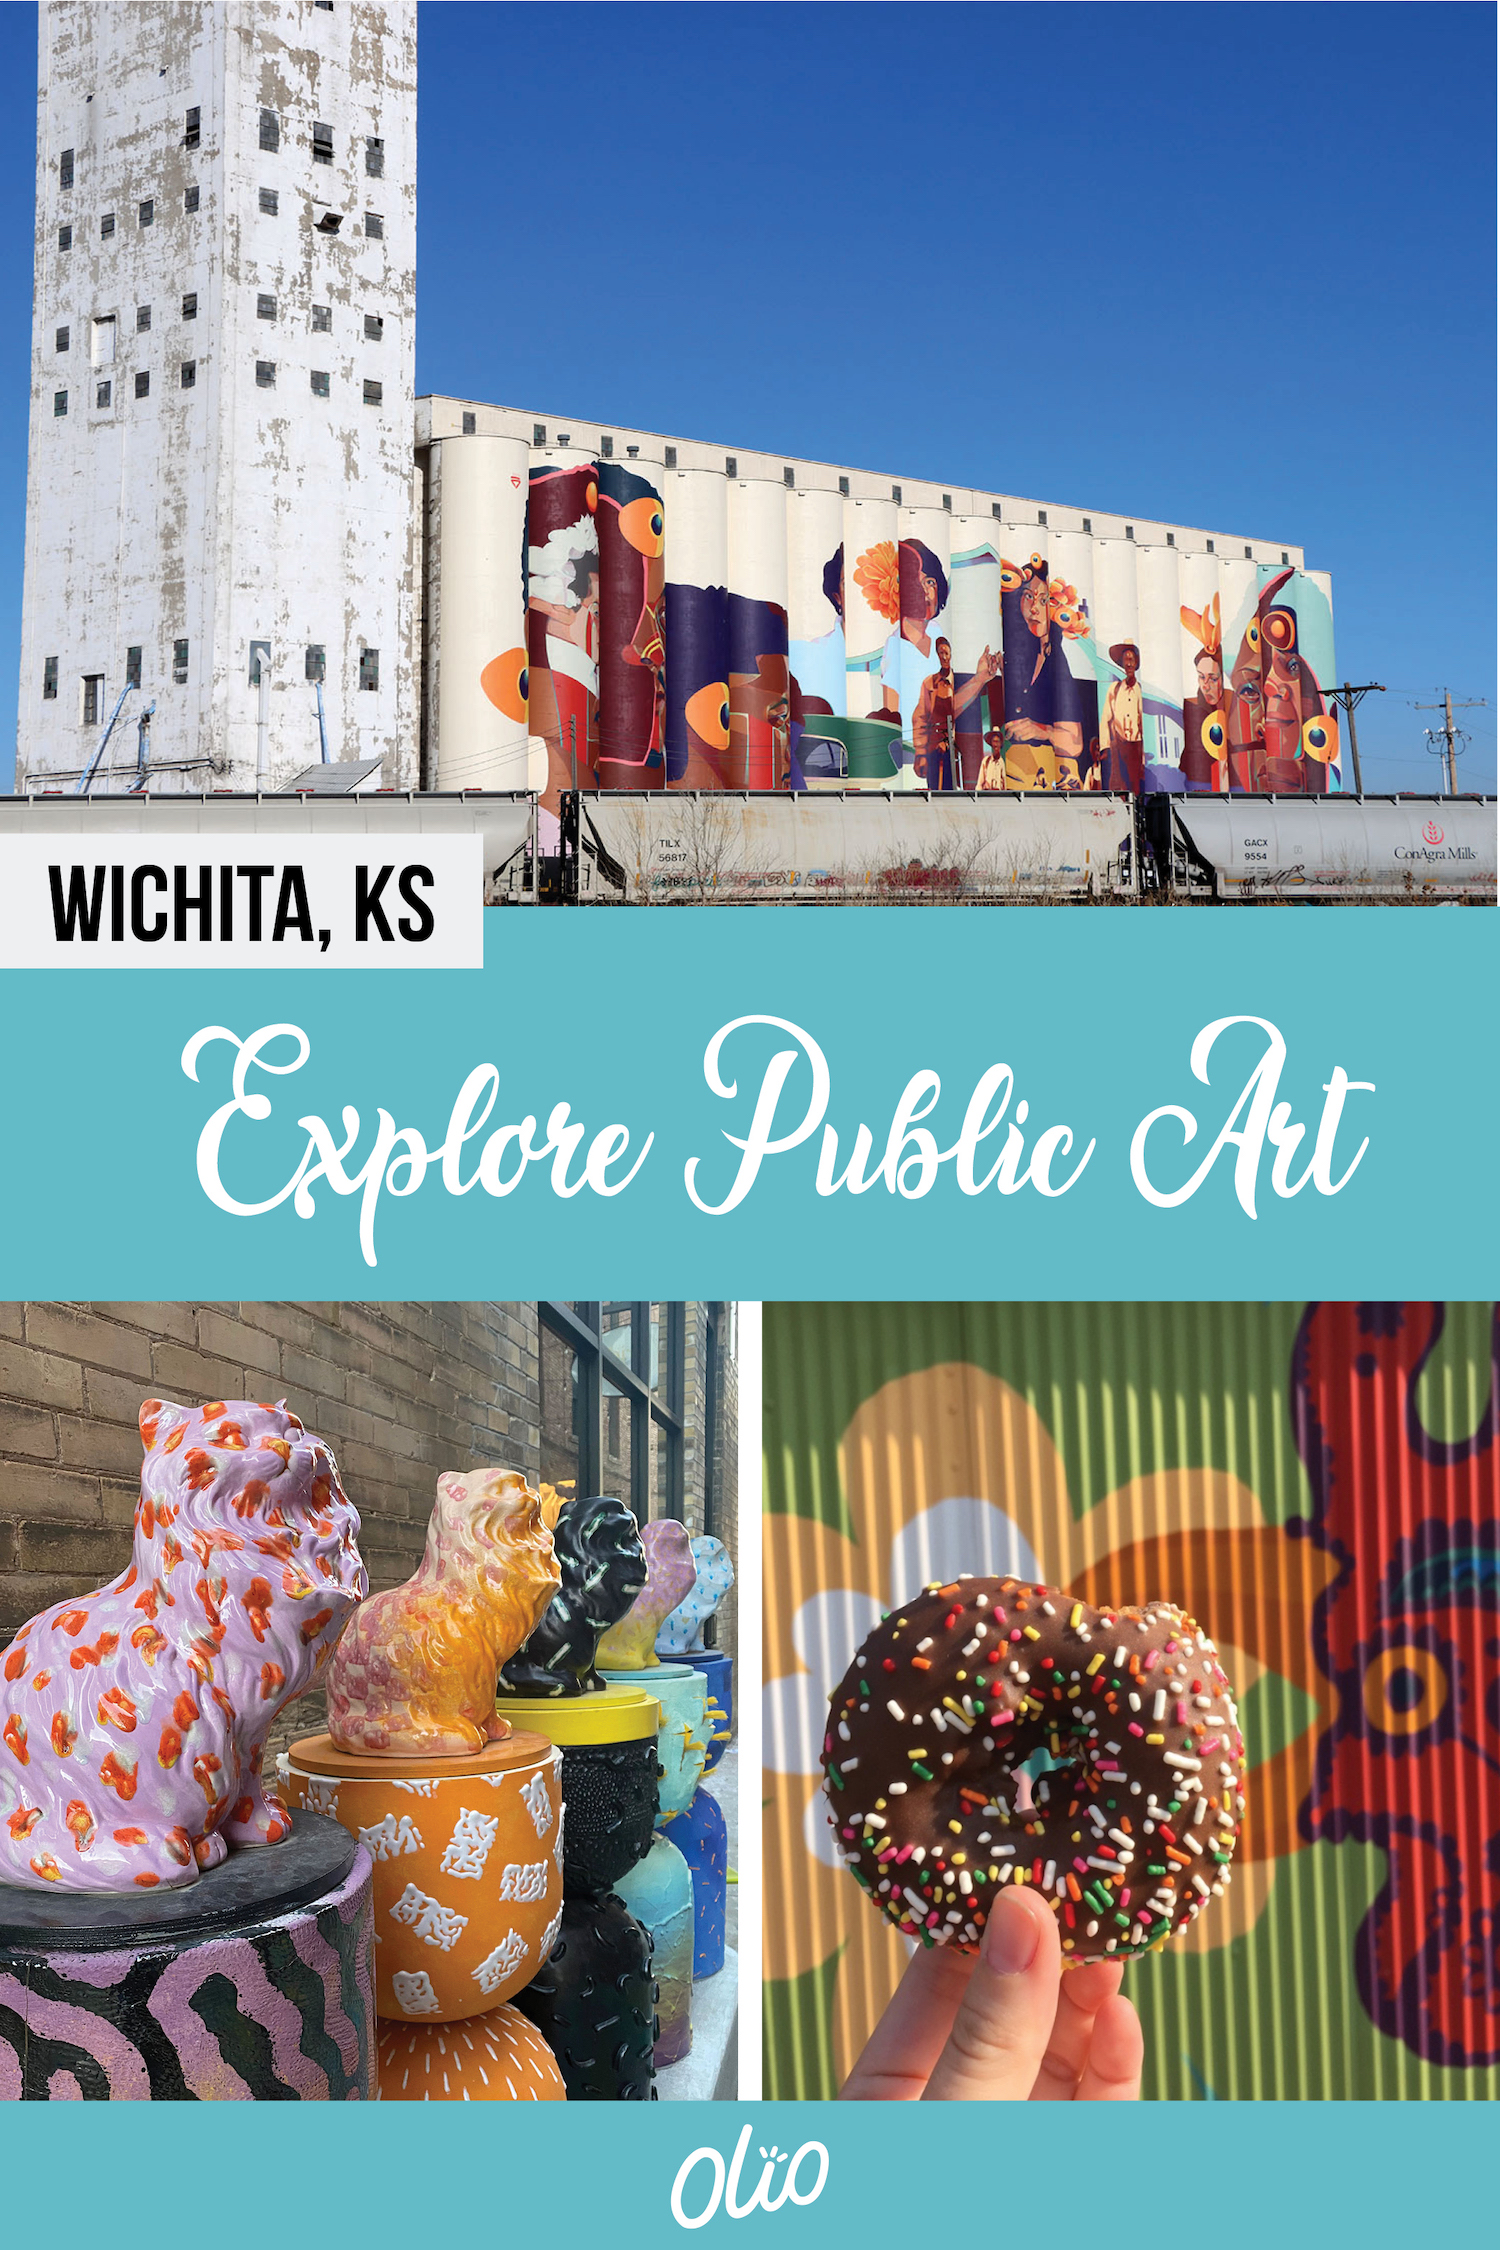 Searching for inspiration?There is lots of public art in Wichita, Kansas to discover! From murals to bronze statues and everything in between, this city has a thriving arts scene you won't want to miss. Plus the murals of Wichita, Kansas make for great photo ops! #Wichita #Kansas #Midwest #publicart